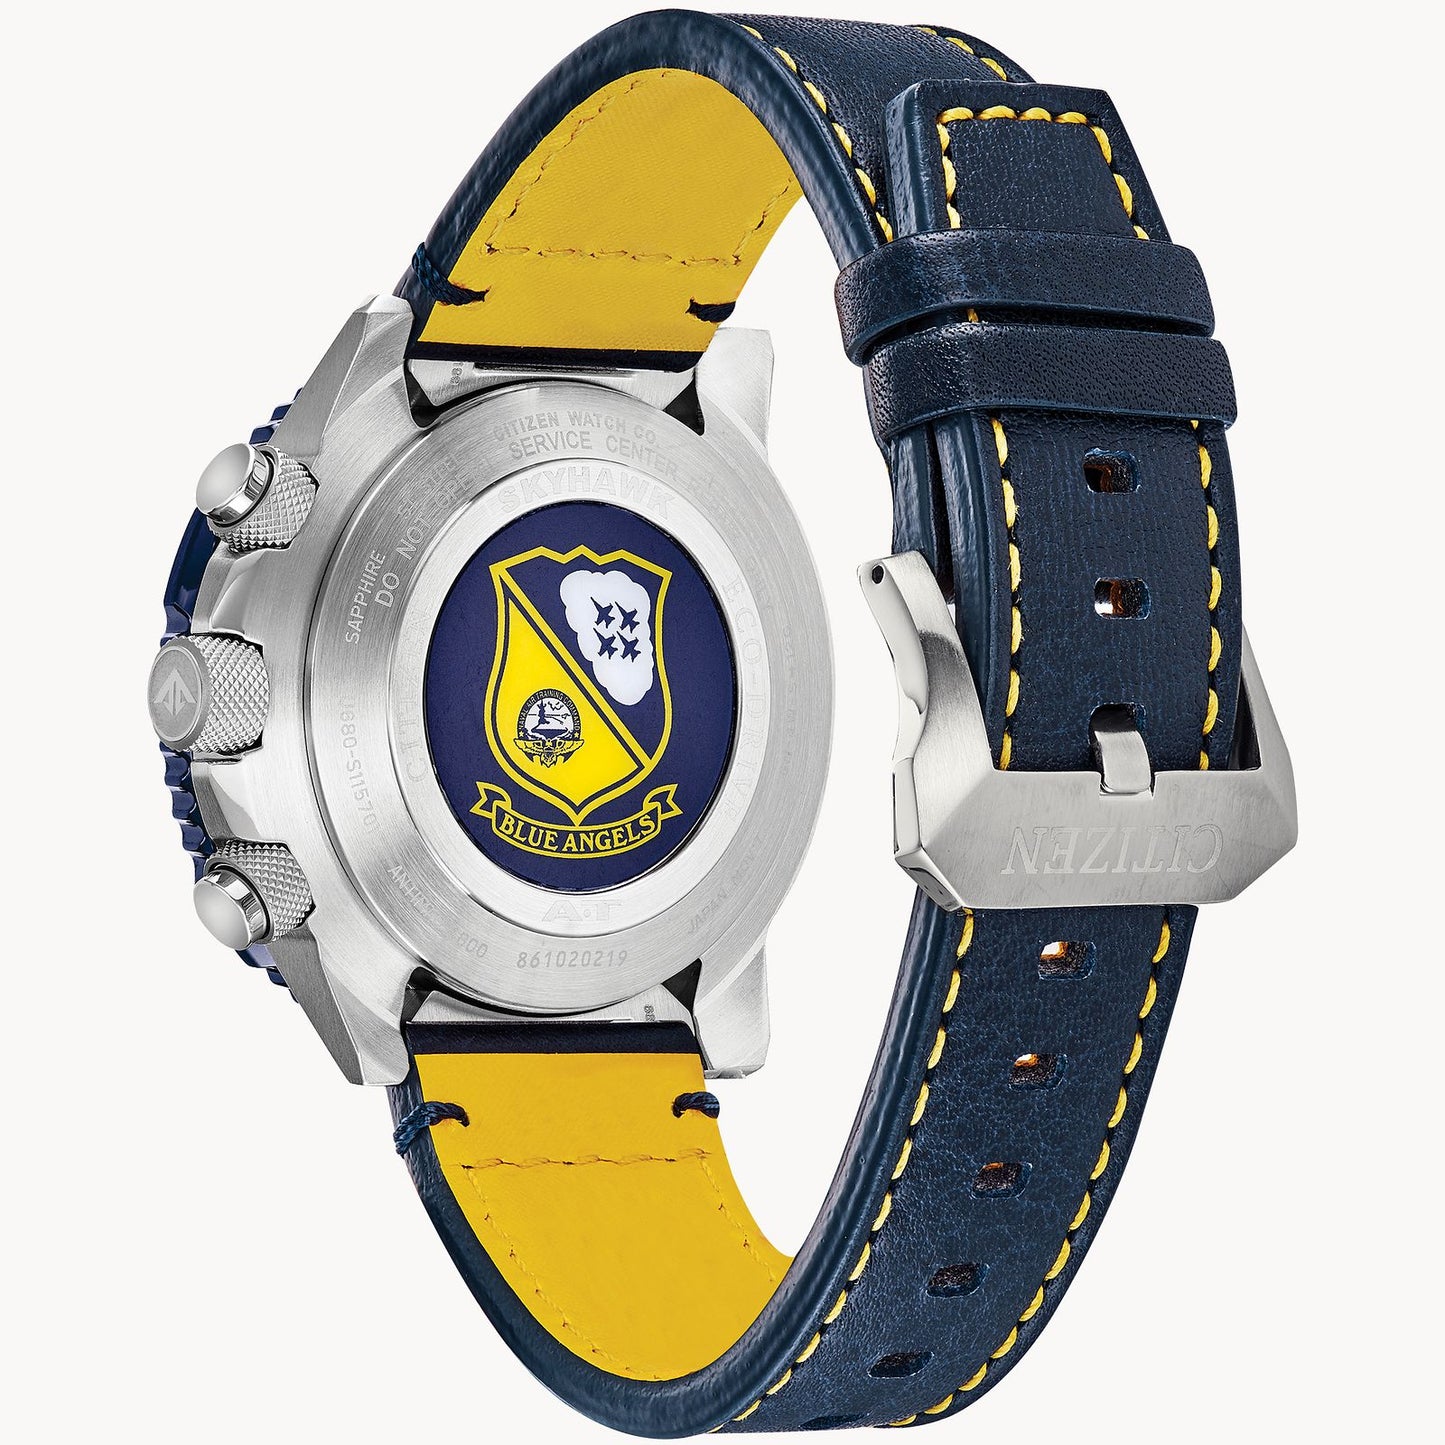 Load image into Gallery viewer, Citizen Promaster Skyhawk A-T Blue Angels watch JY8078-01L
